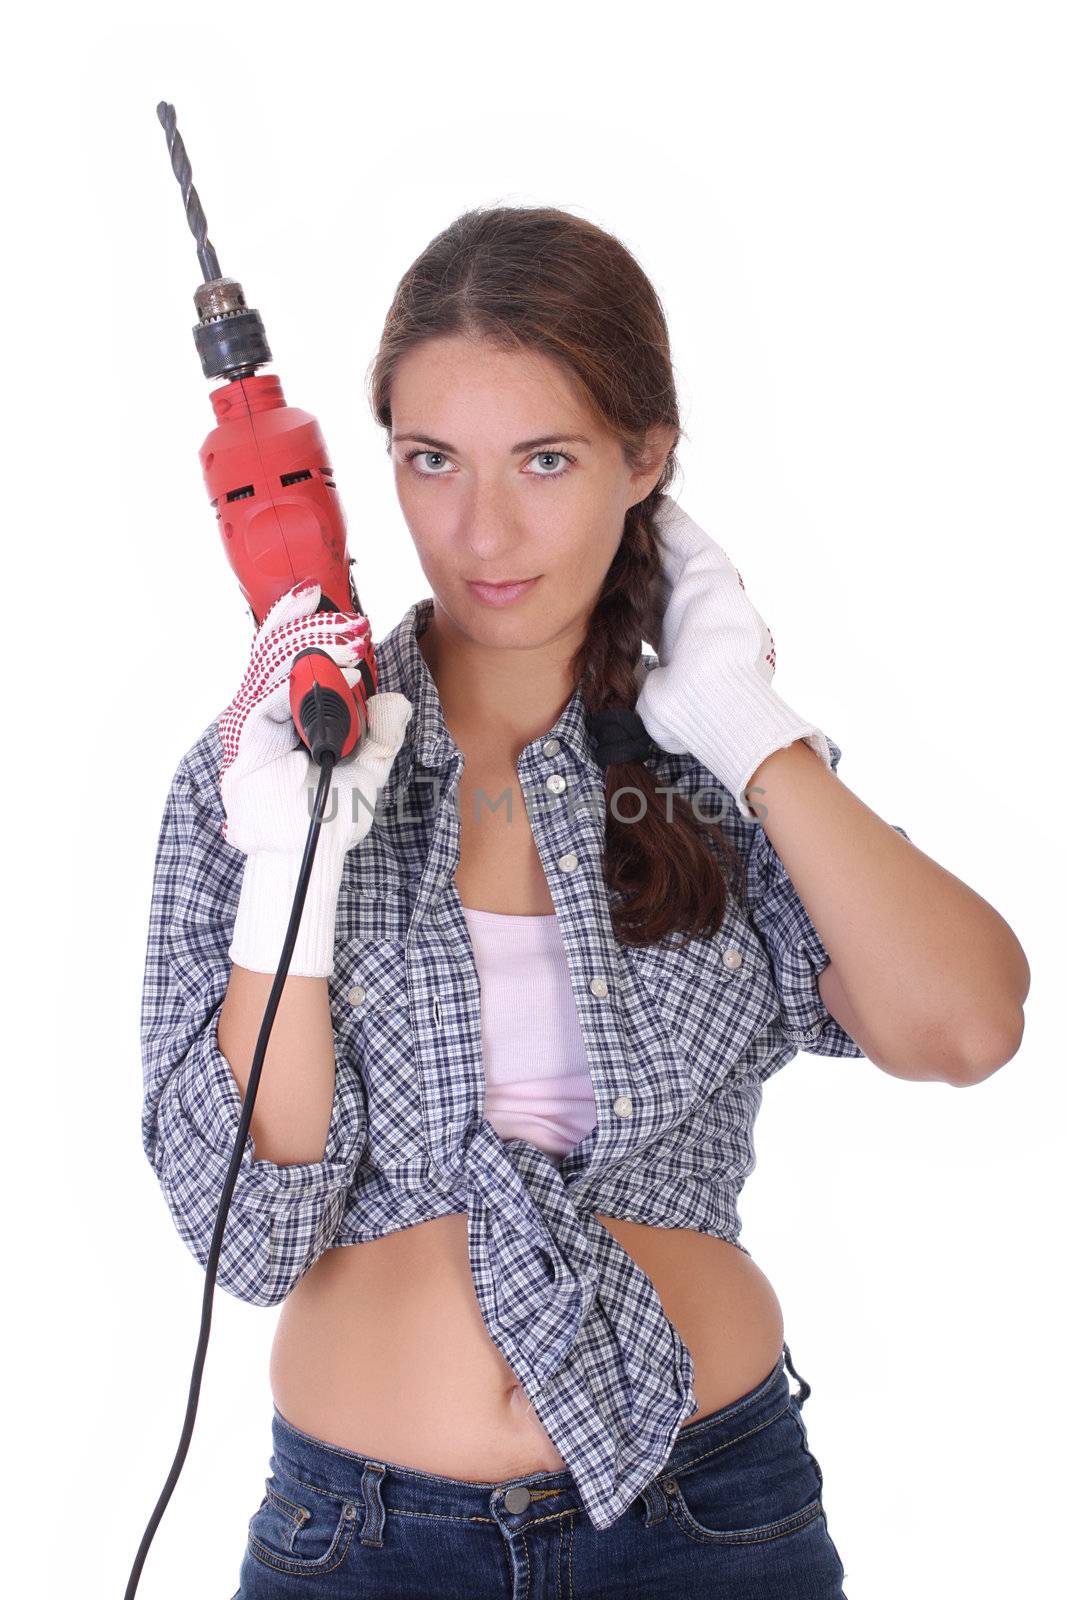 Beauty woman with auger on white background